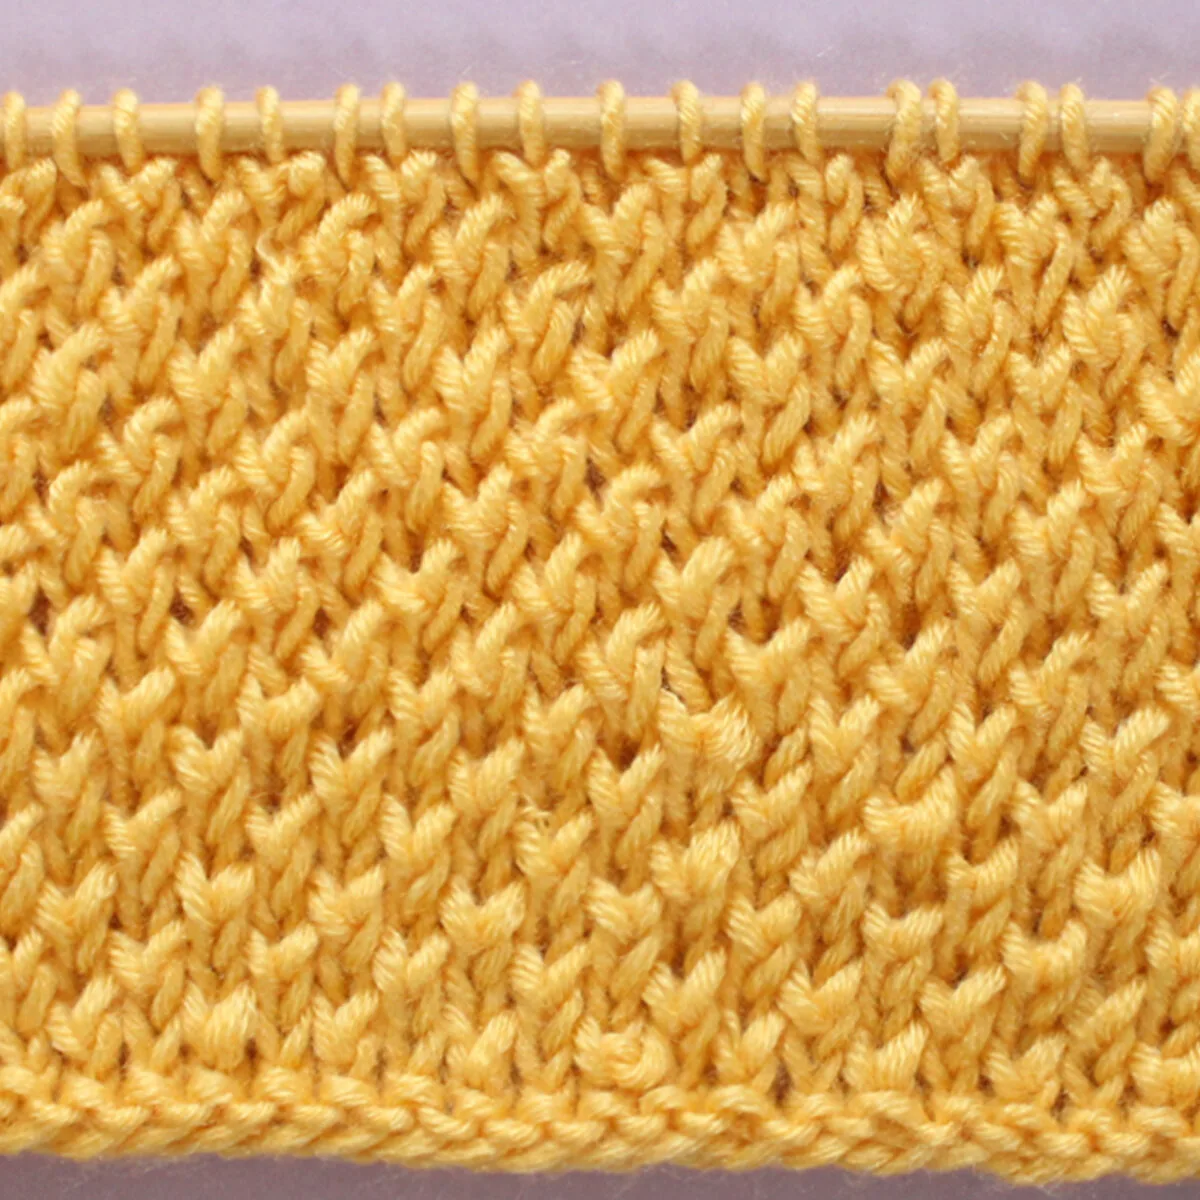 Bee Stitch Knitting Pattern texture in yellow color yarn on knitting needle.